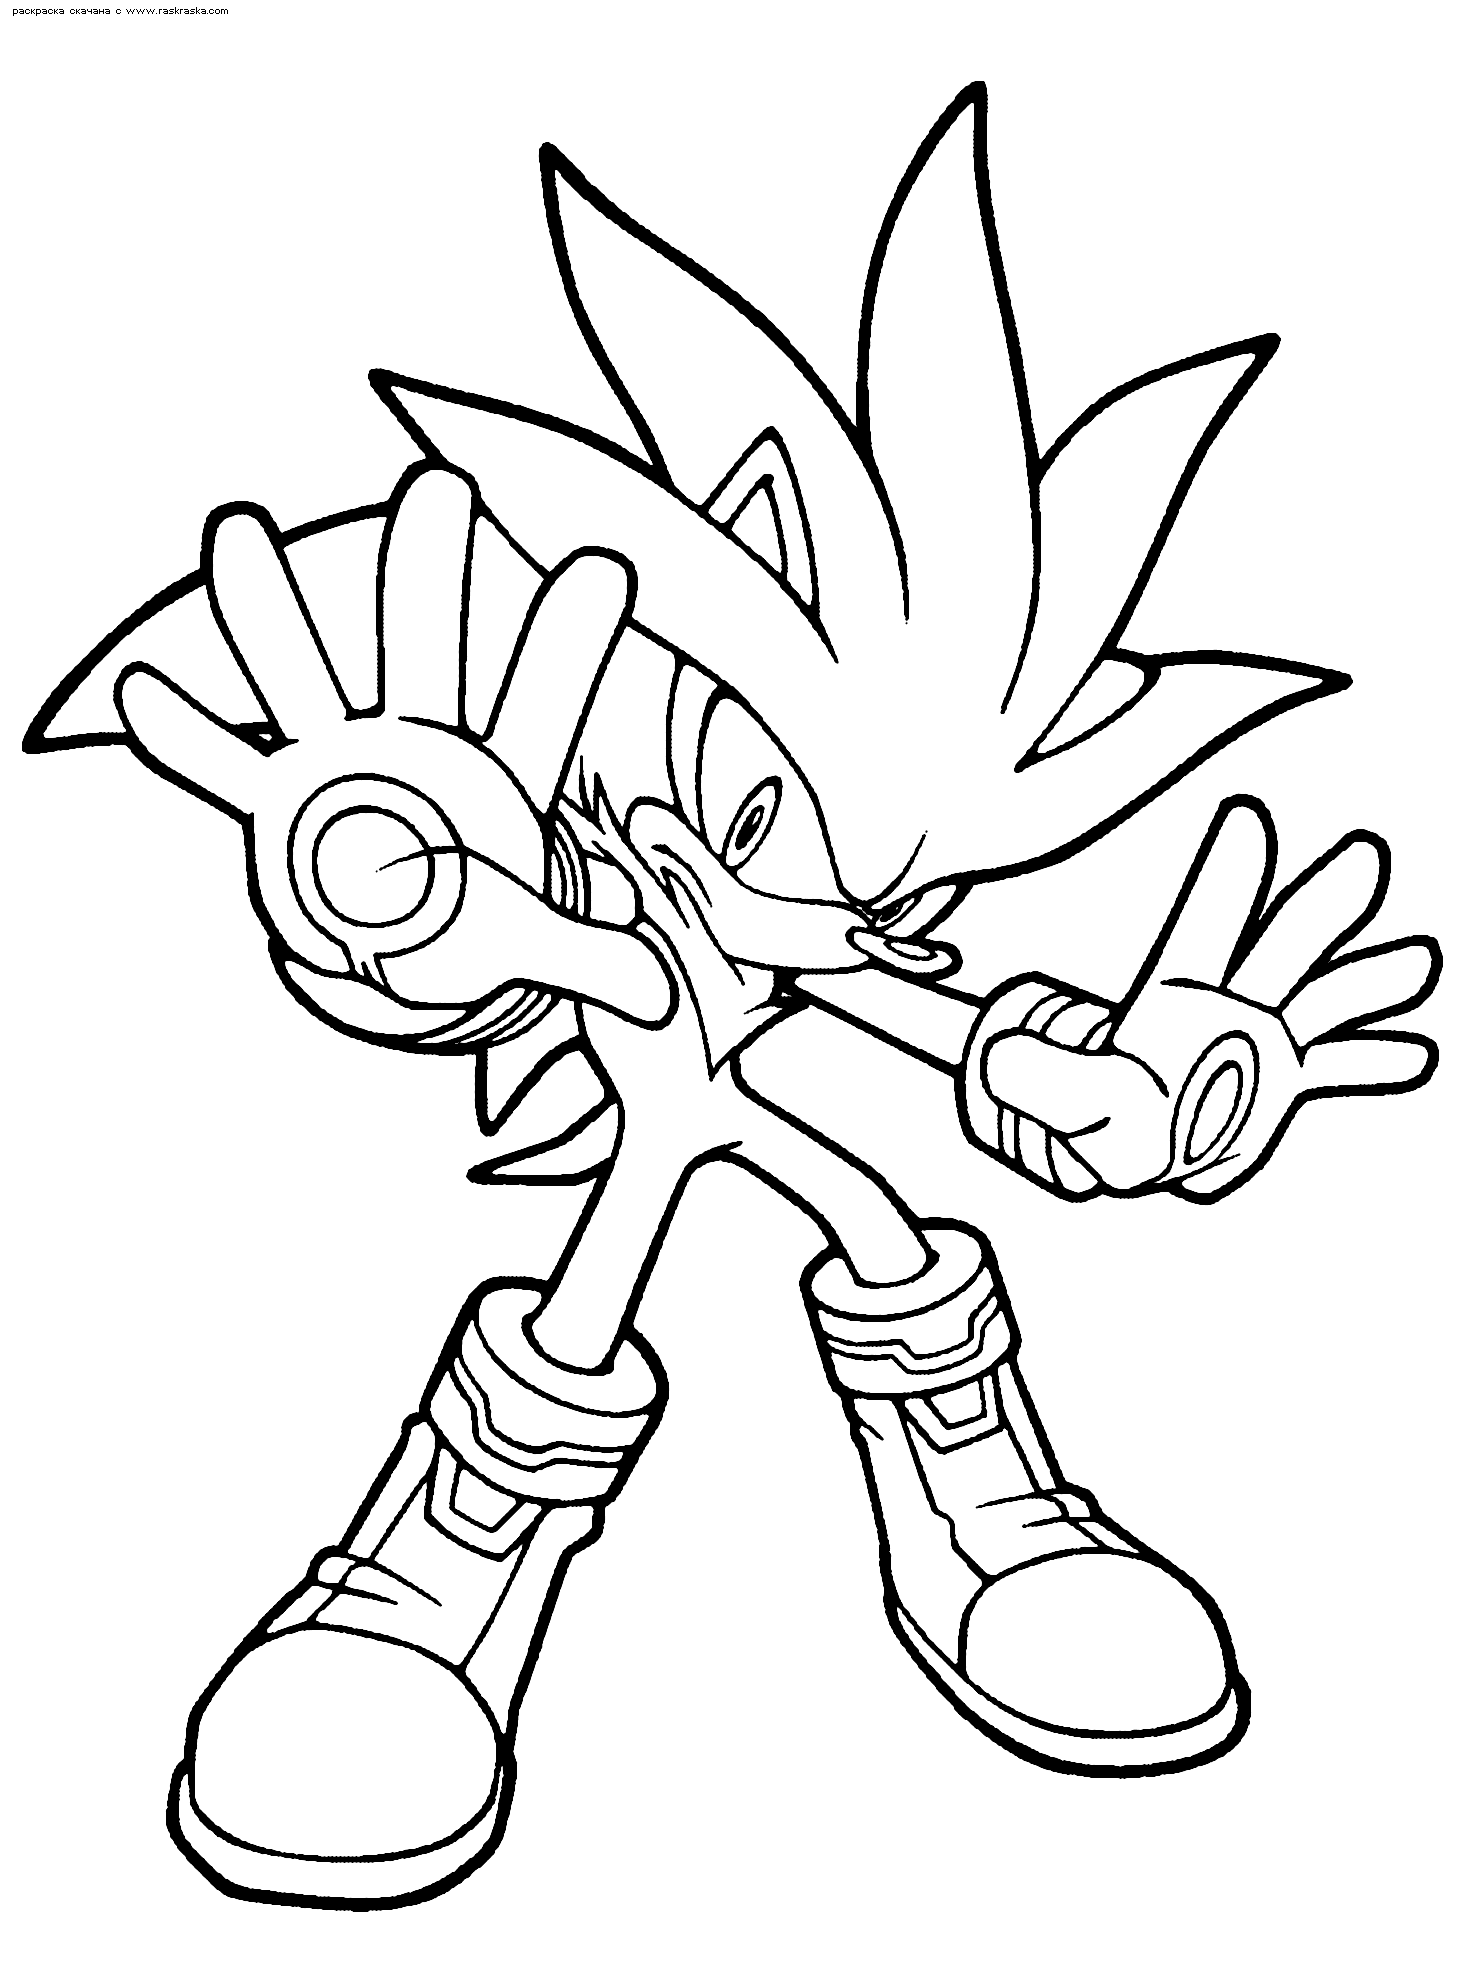 Shadow The Hedgehog - Coloring Pages for Kids and for Adults